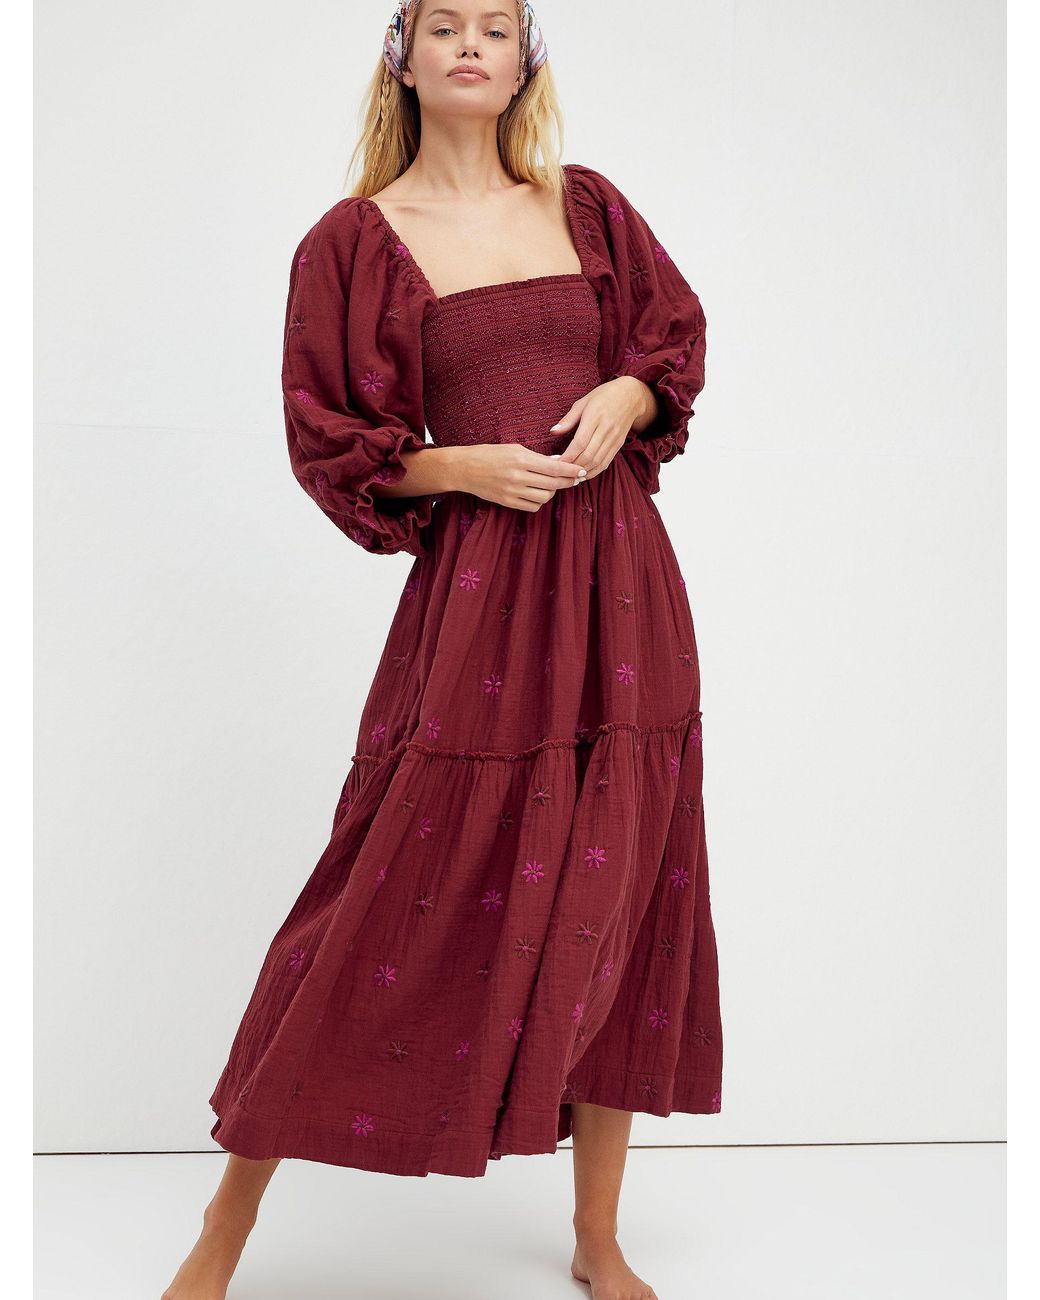 Free People Dahlia Embroidered Maxi Dress - Lyst